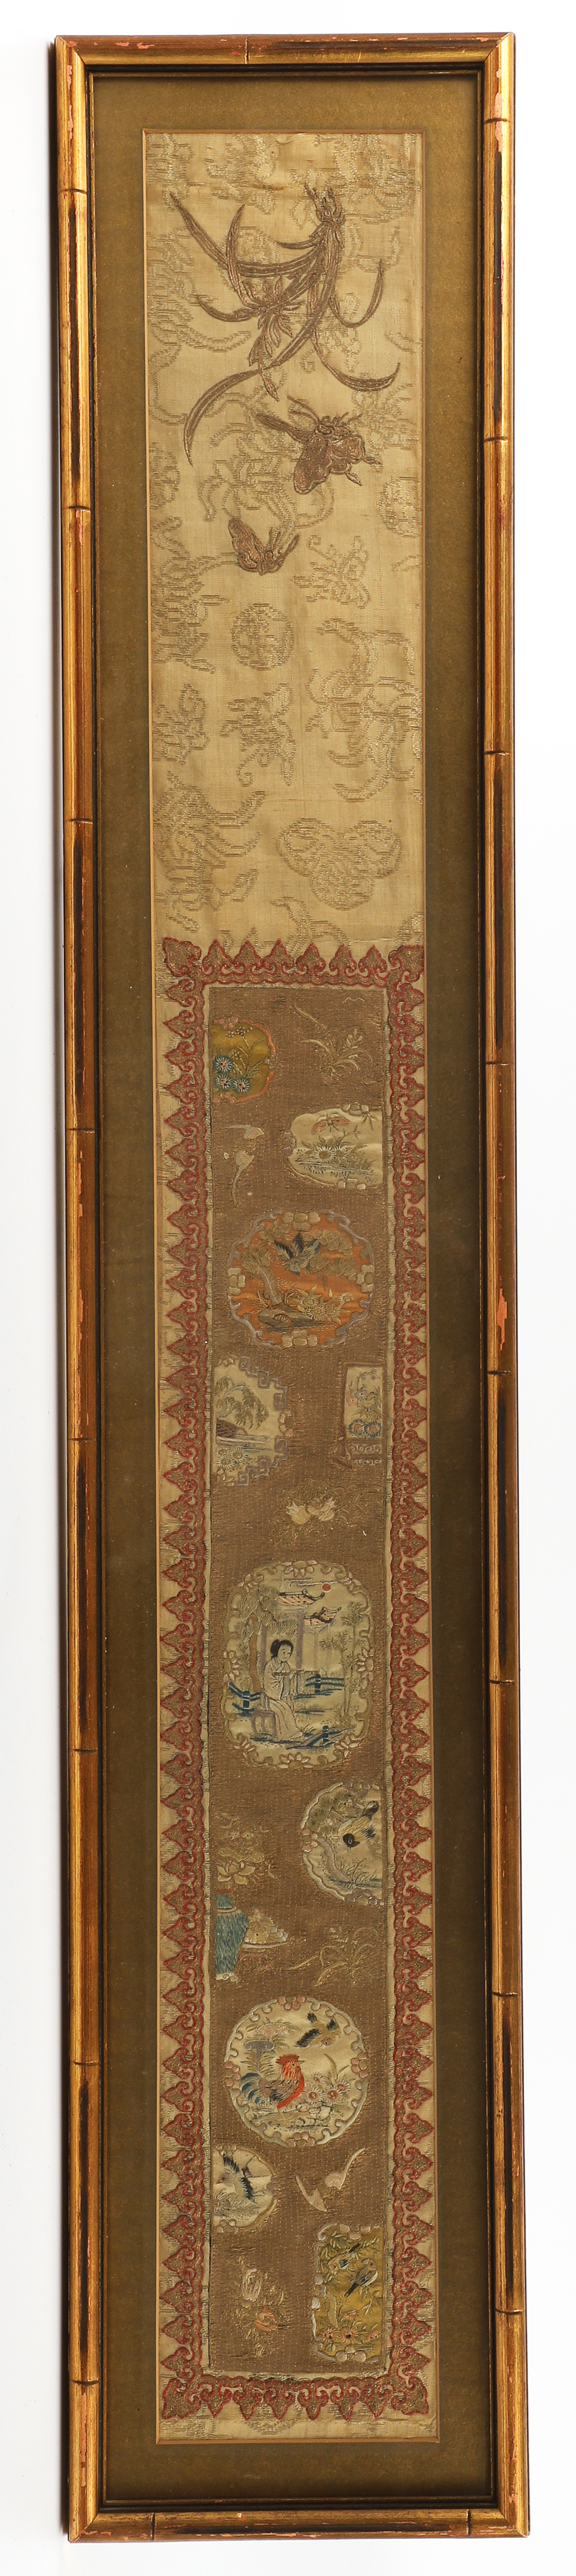 Chinese embroidery, in gilt faux